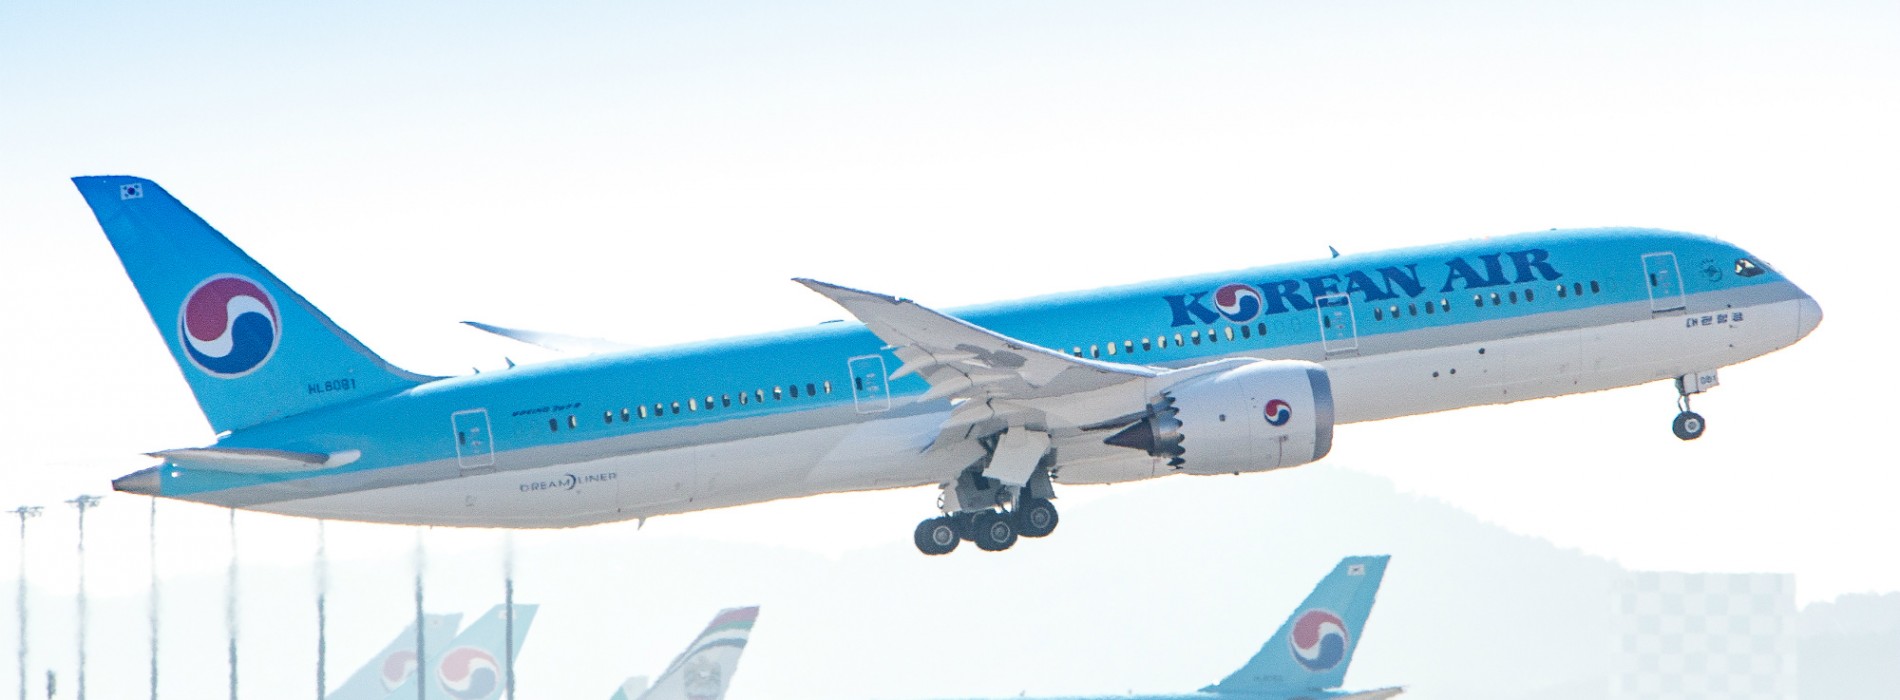 The UN Conference on the Aviation Industry’ to be held in Korea